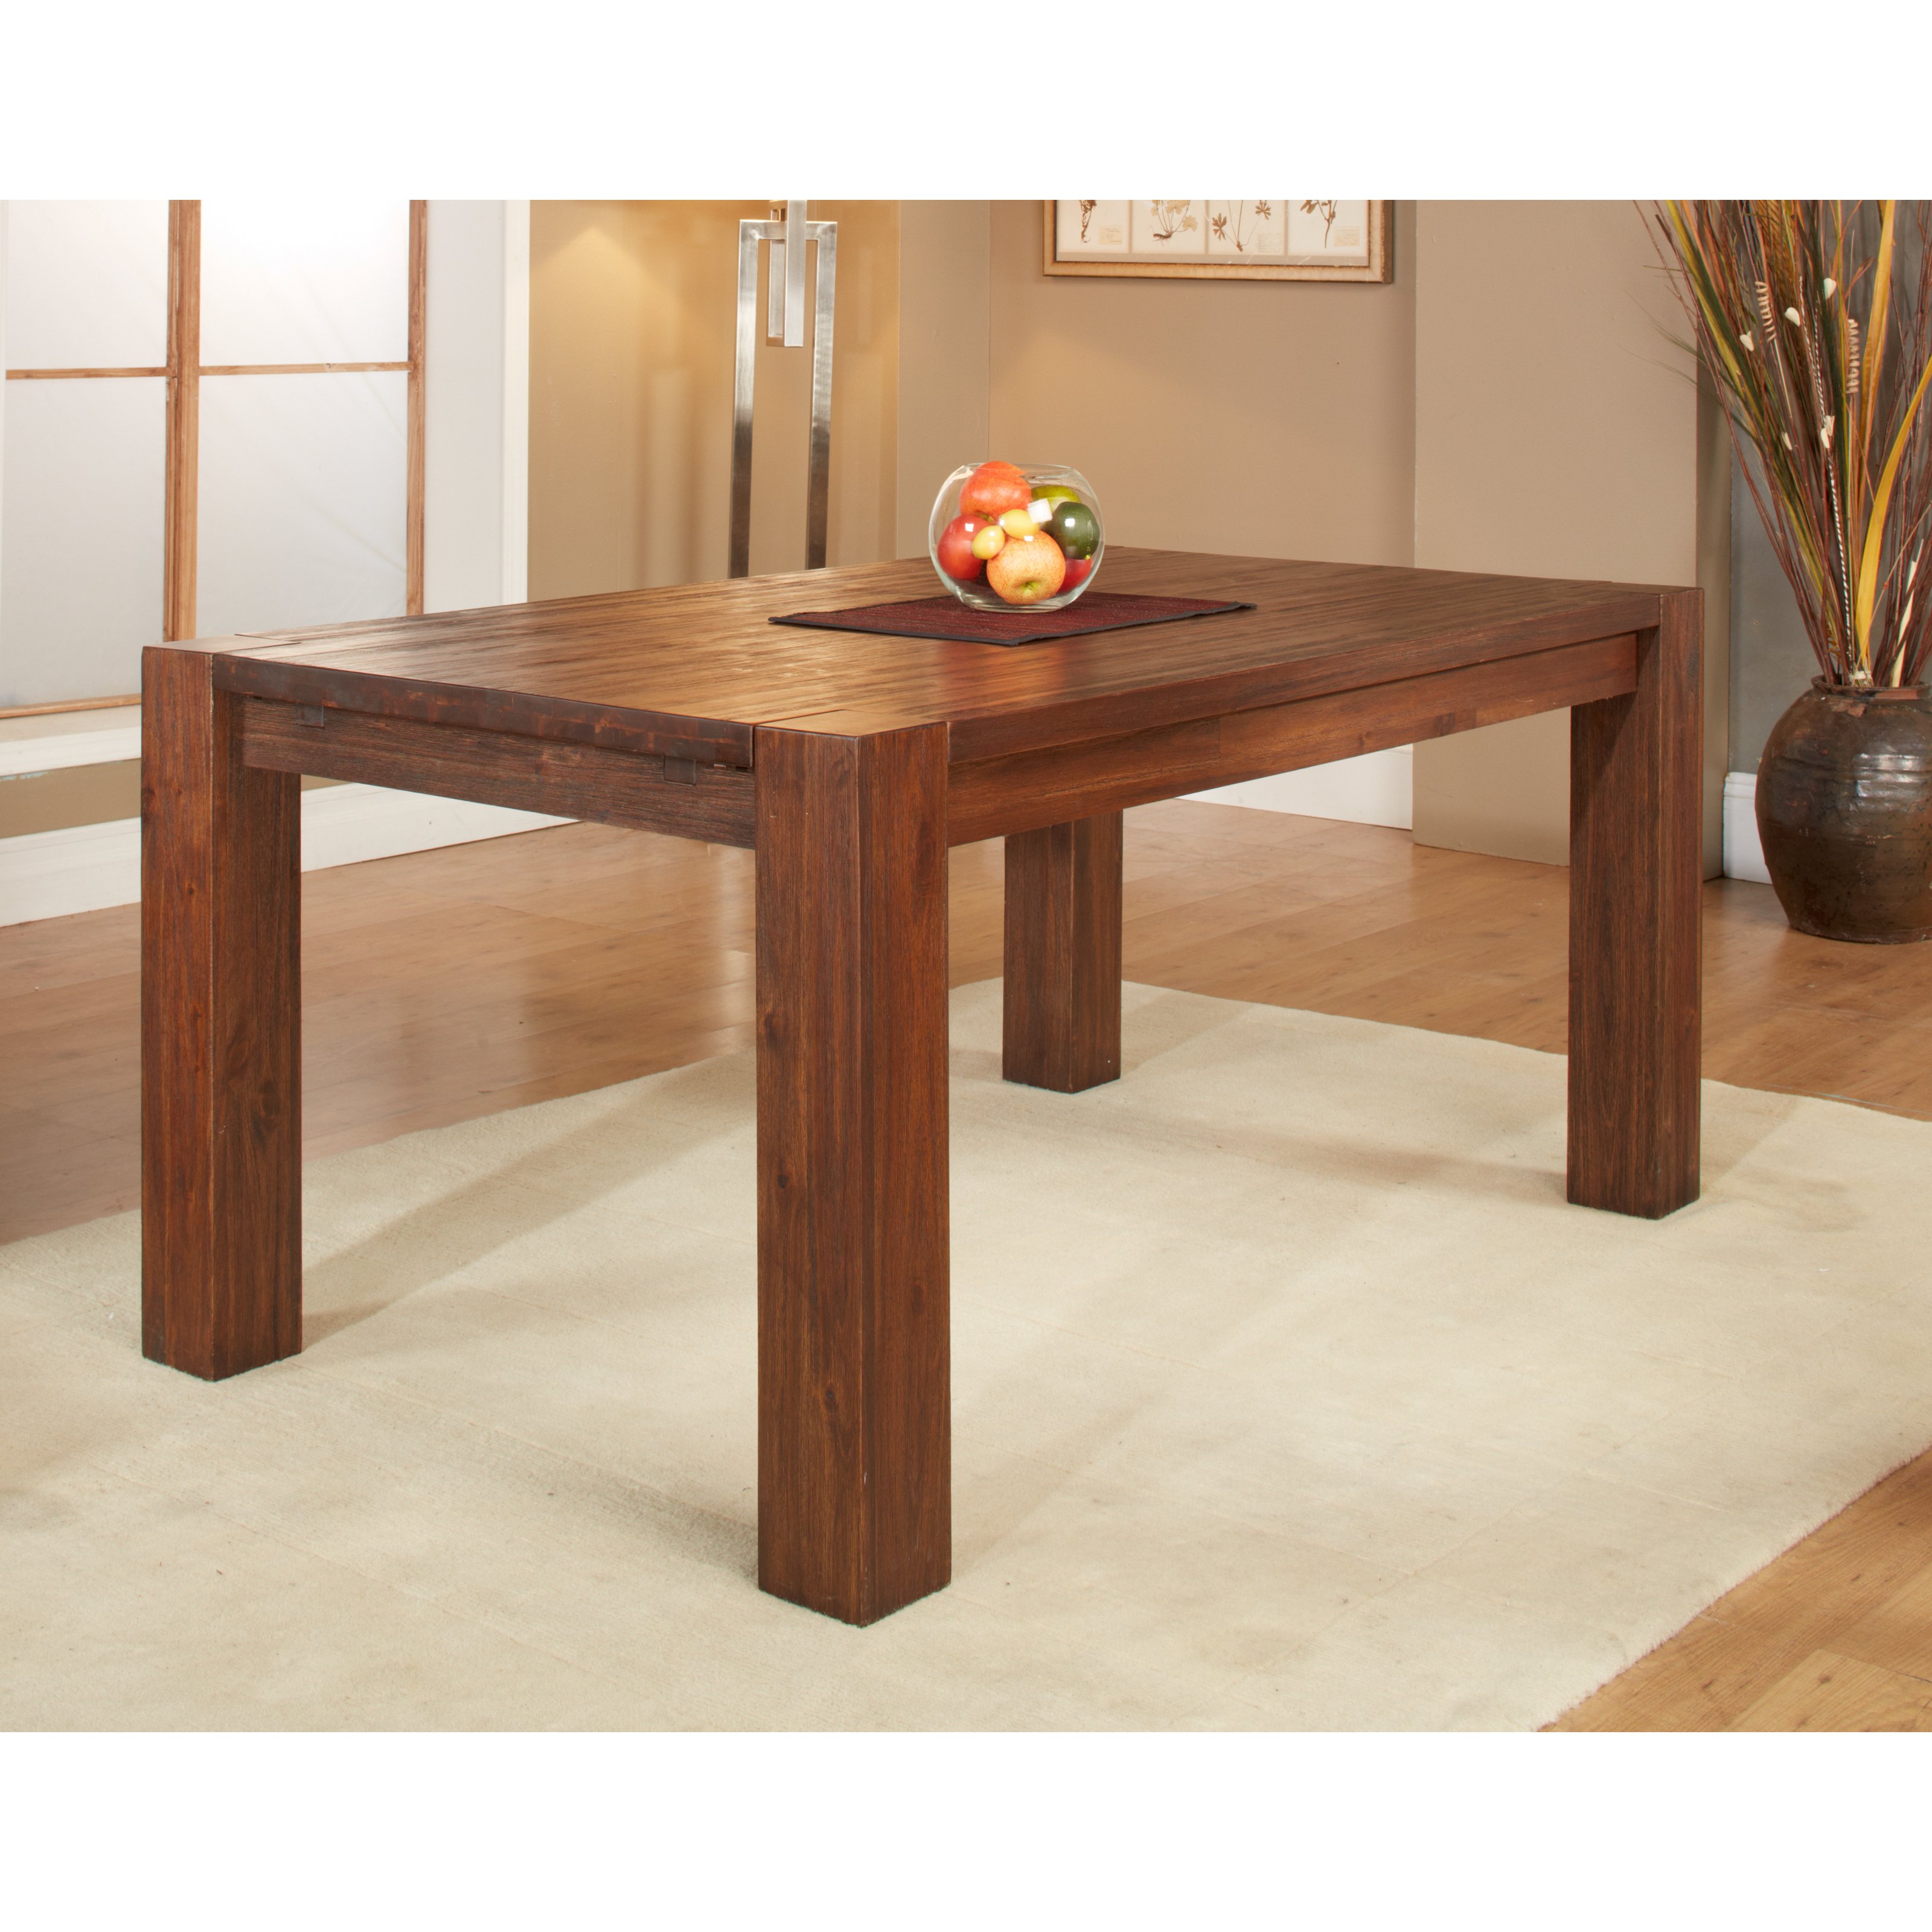 Solid wood dining table Modus Herbst solid wood extending table - cider |  Hayneedle DAJKYXZ